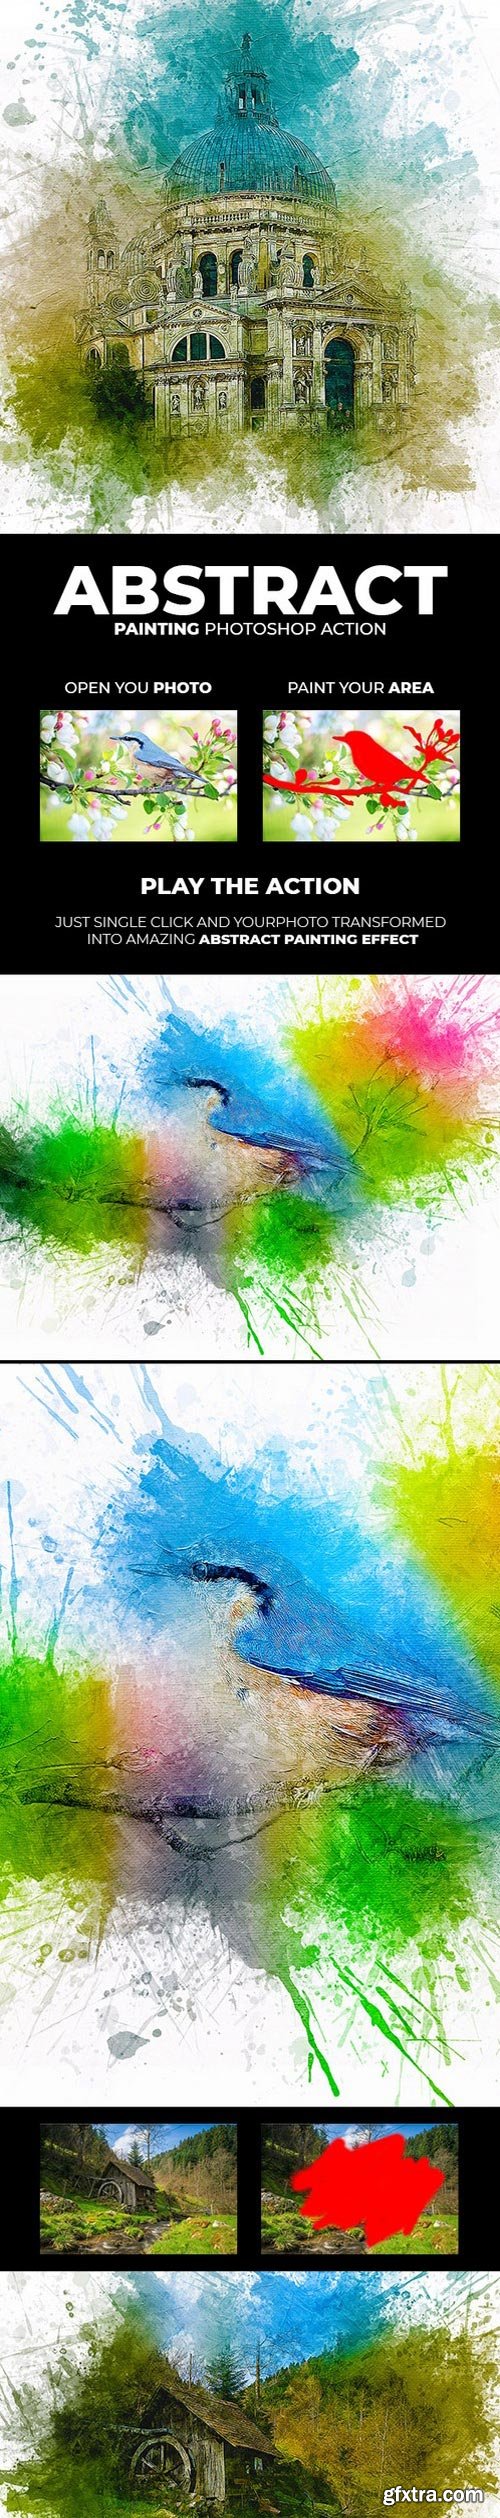 Graphicriver - Abstract Ink Painting 21714322